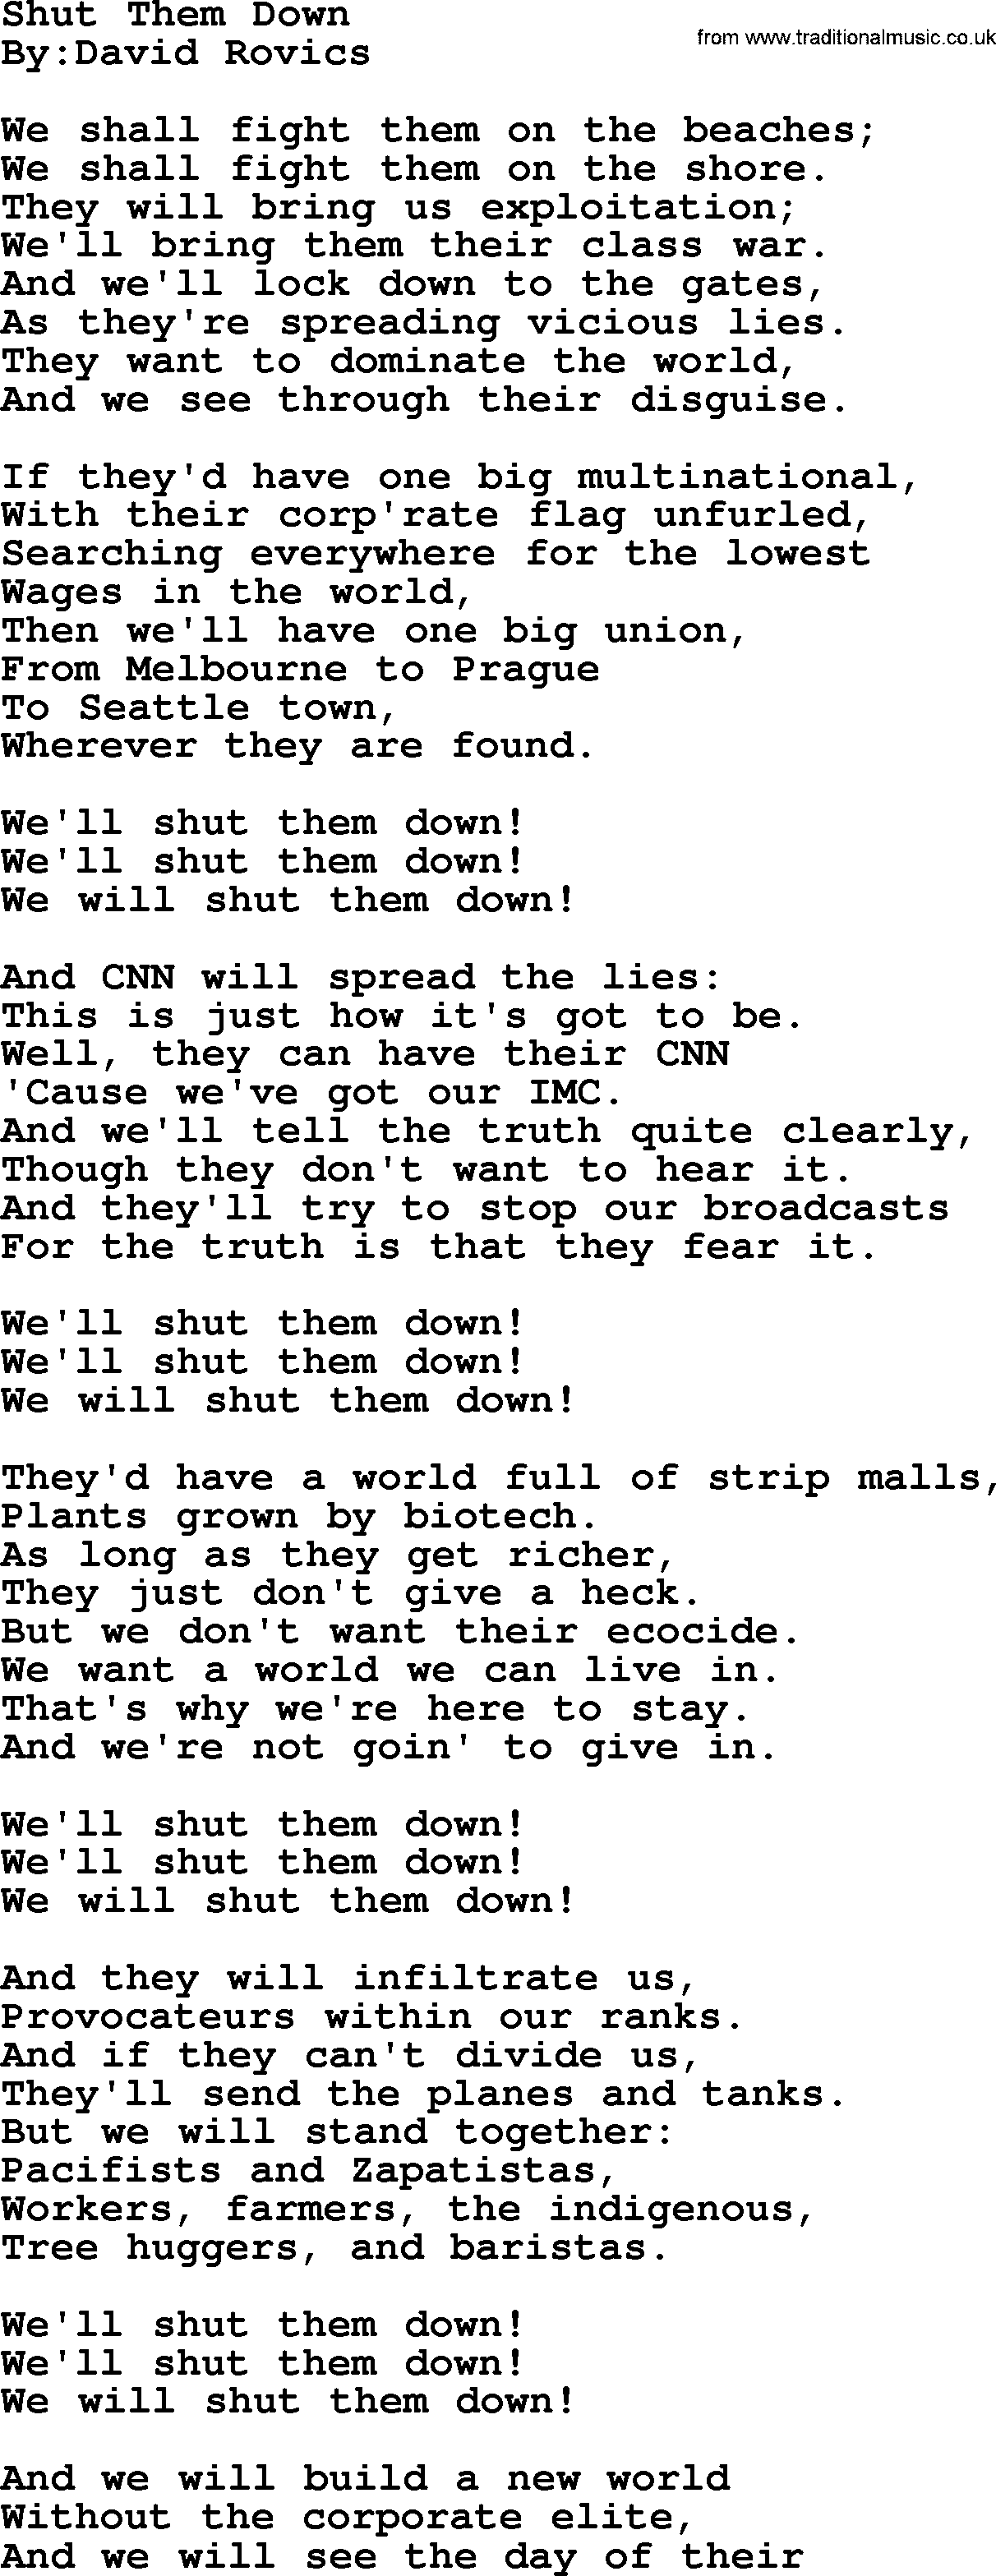 Political, Solidarity, Workers or Union song: Shut Them Down, lyrics